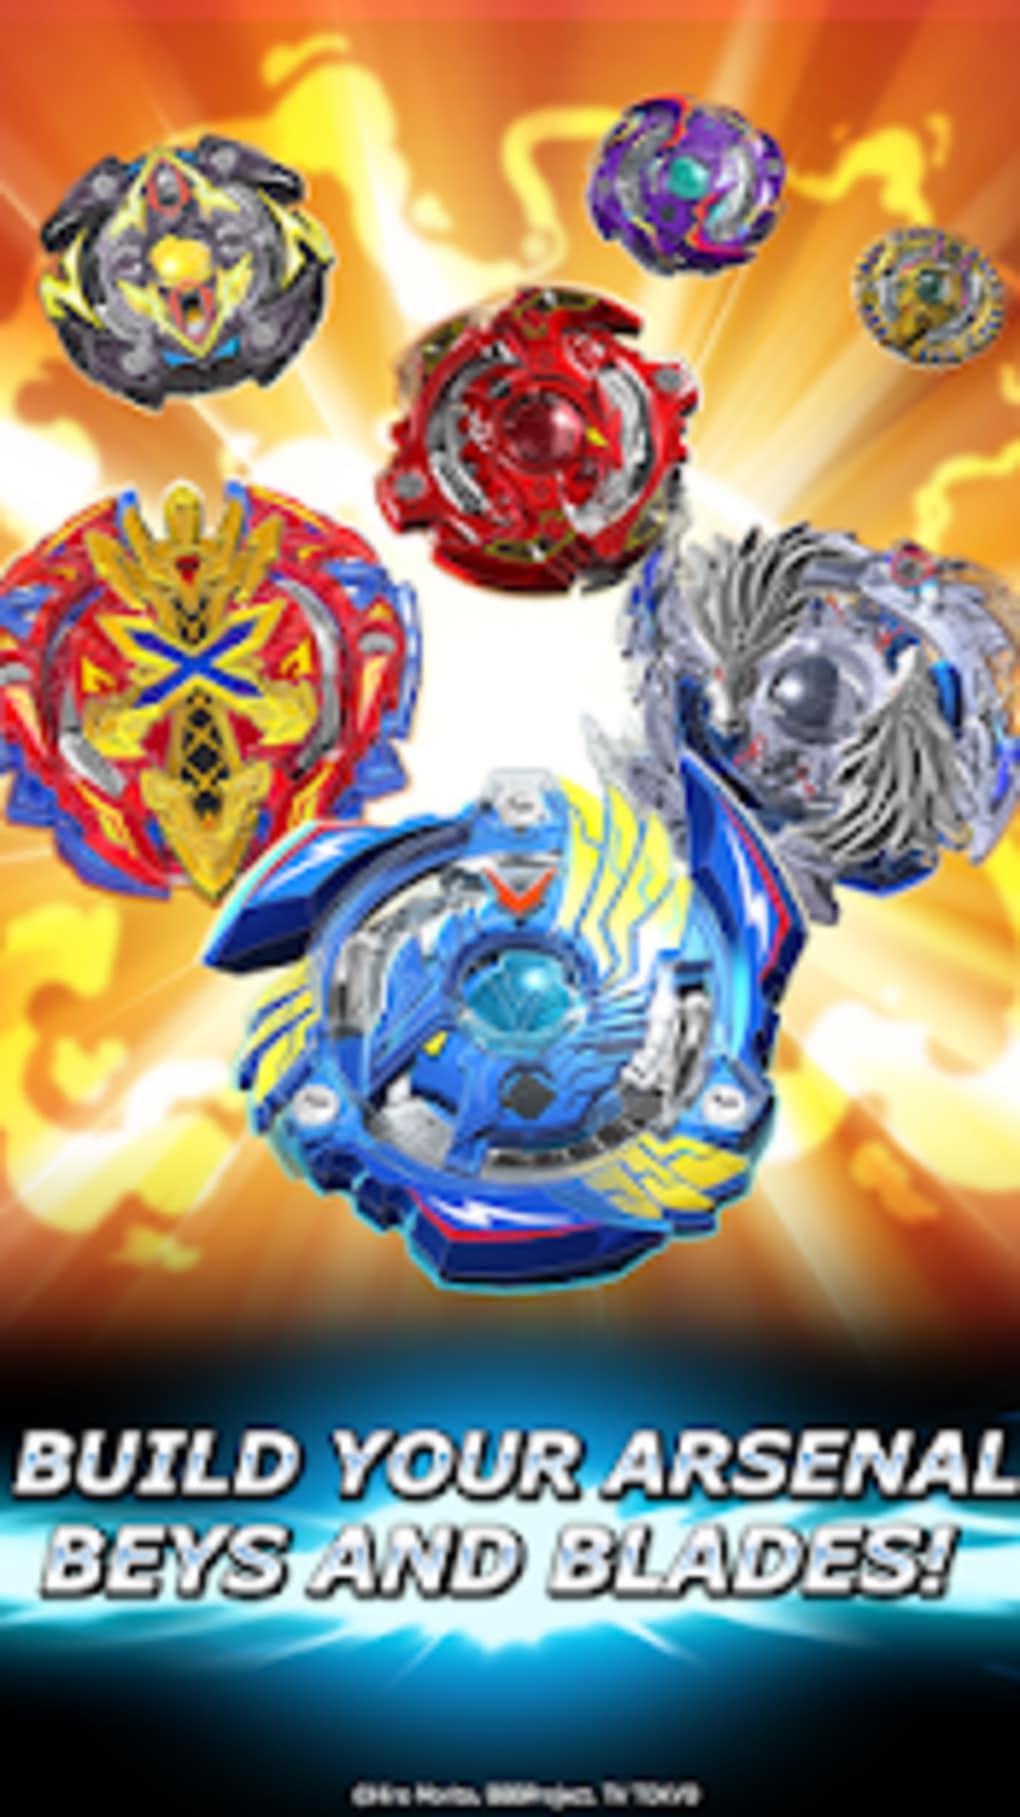 BEYBLADE BURST app APK Download for Android Free